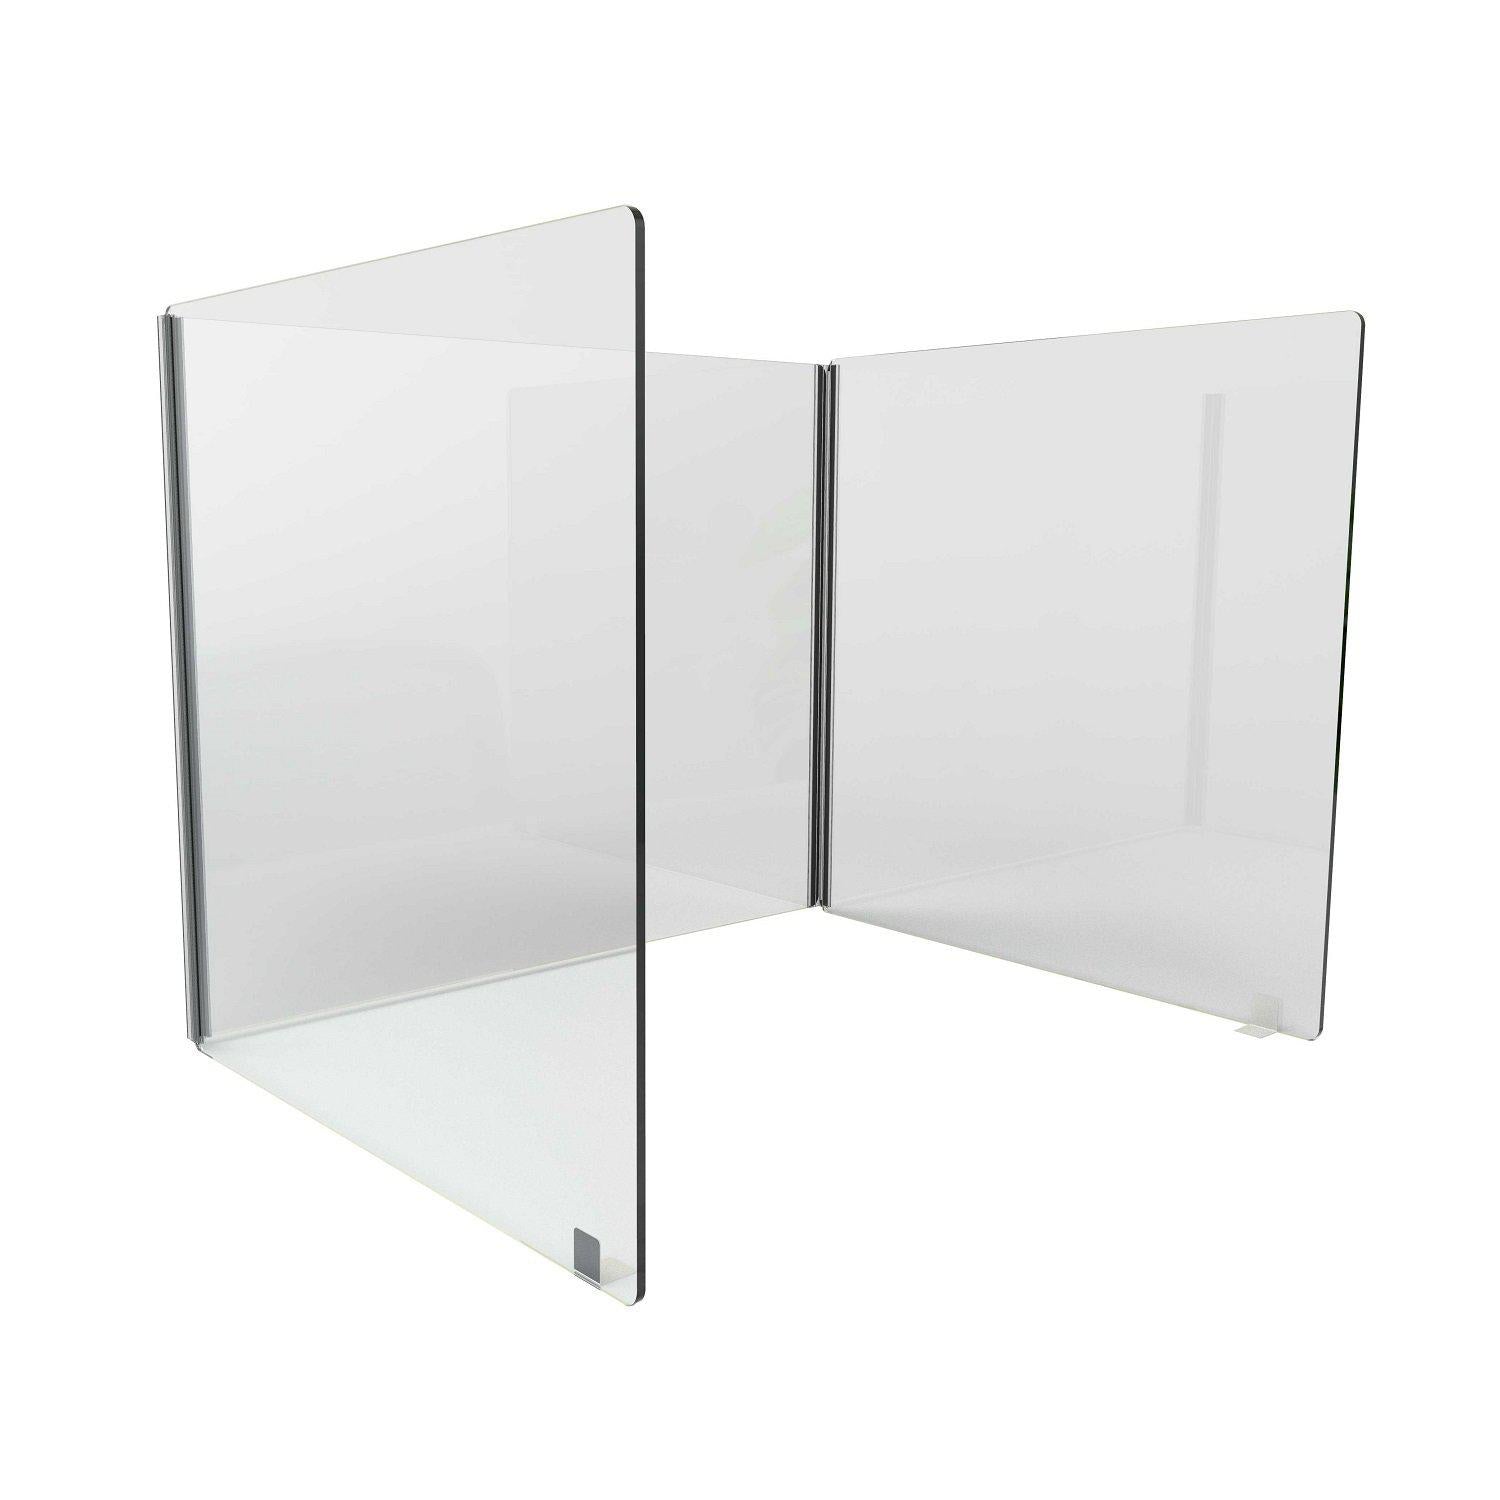 3-Sided Clear Thermoplastic Desktop Protection Screen/Sneeze Guard, 24”H x 24”W x 16”D